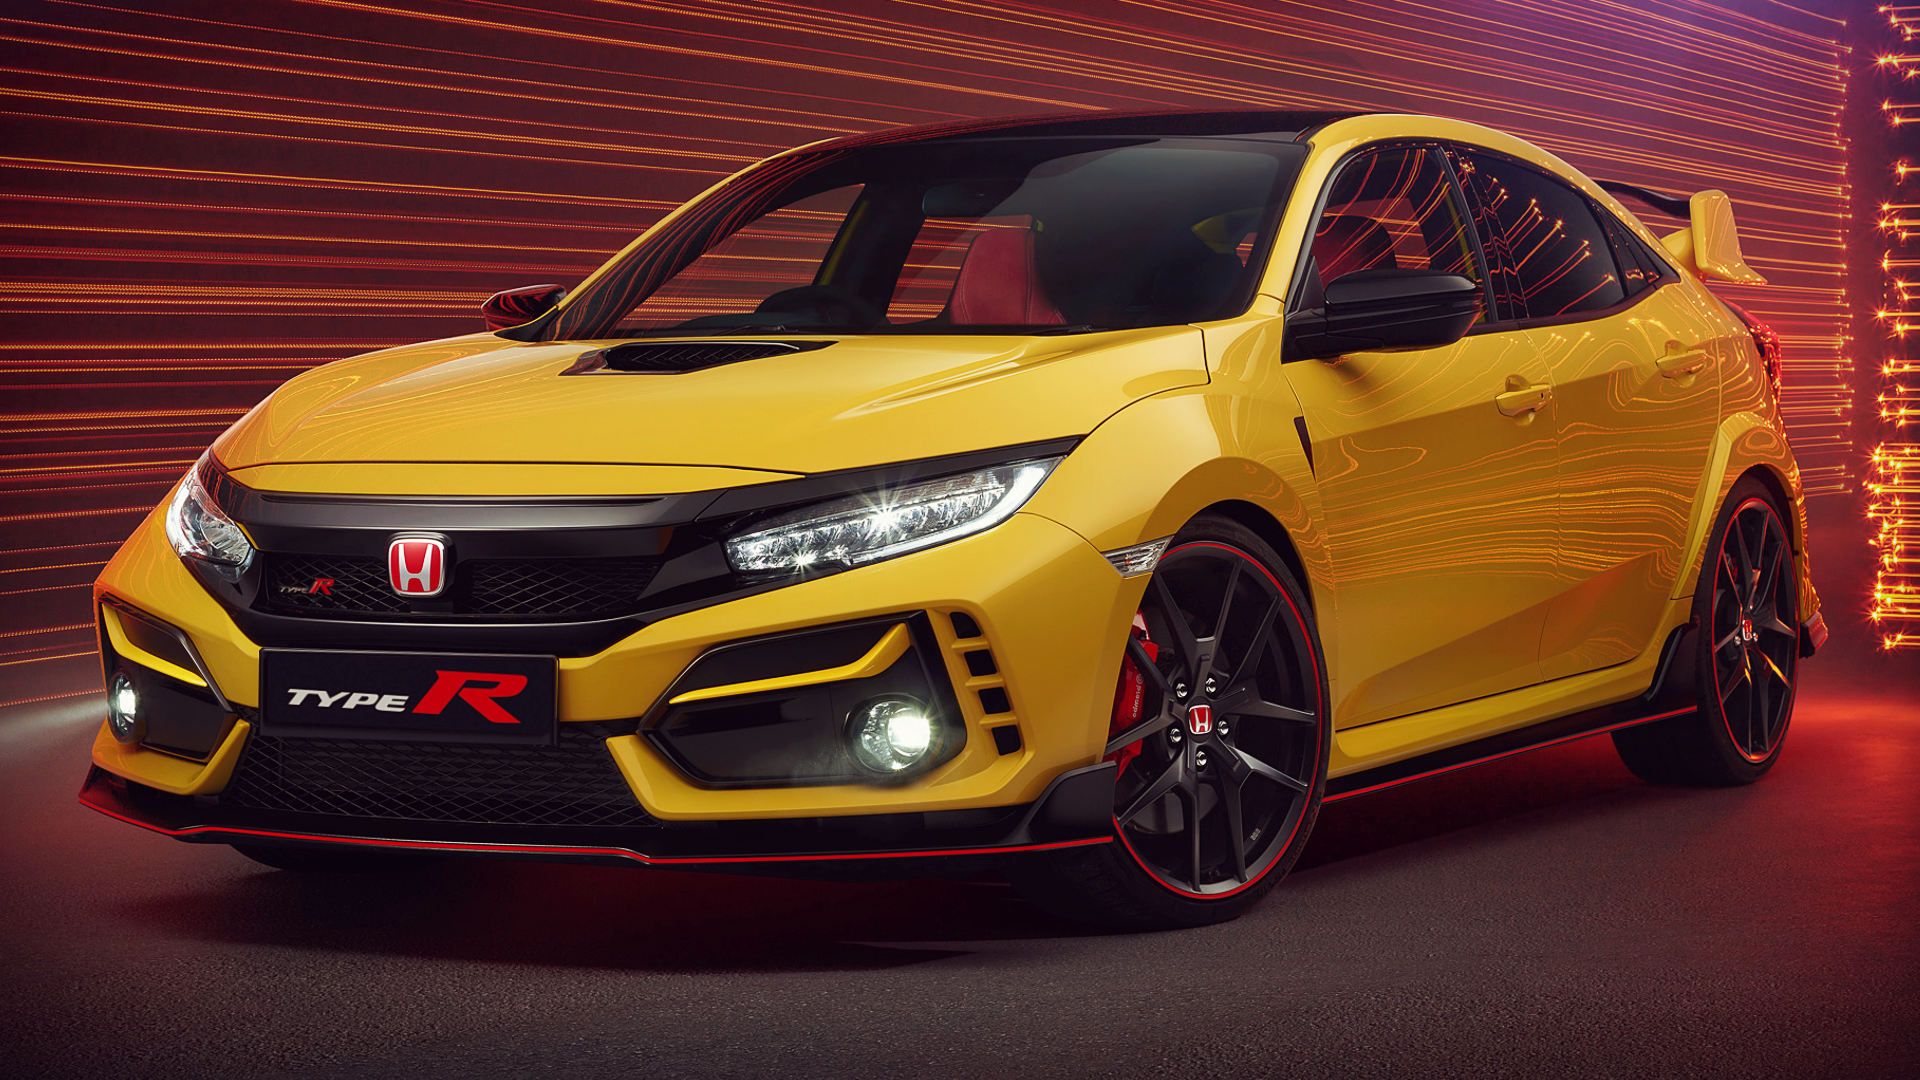 Honda Civic Type R Limited Edition 2021 Specs Wallpaper